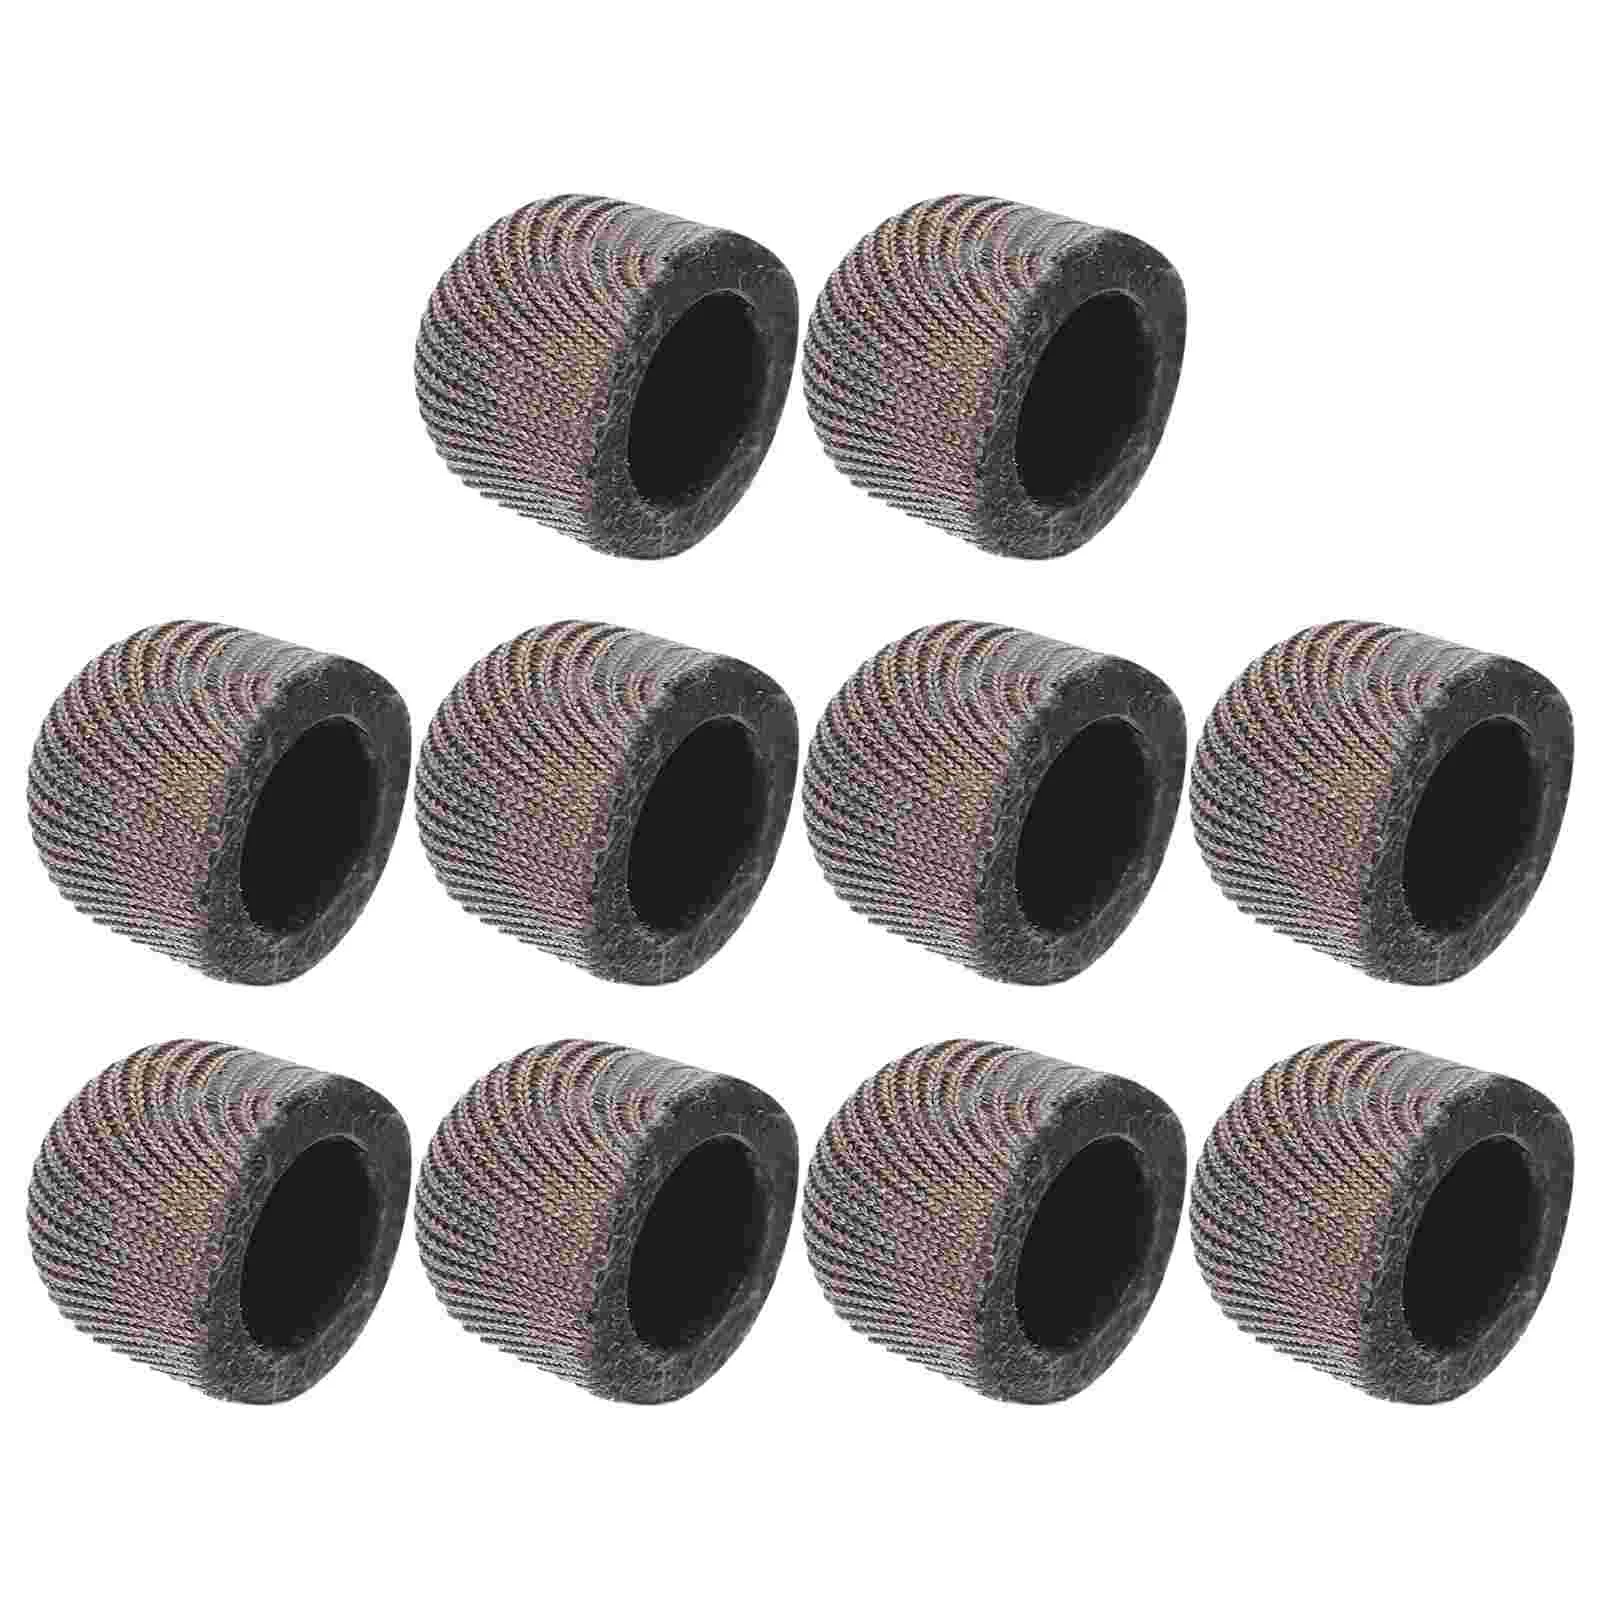 

10 Pcs Capacitive Pen Tip Nibs Stylus Tips for Touch Screens Mesh Fiber Capacitance Replacement